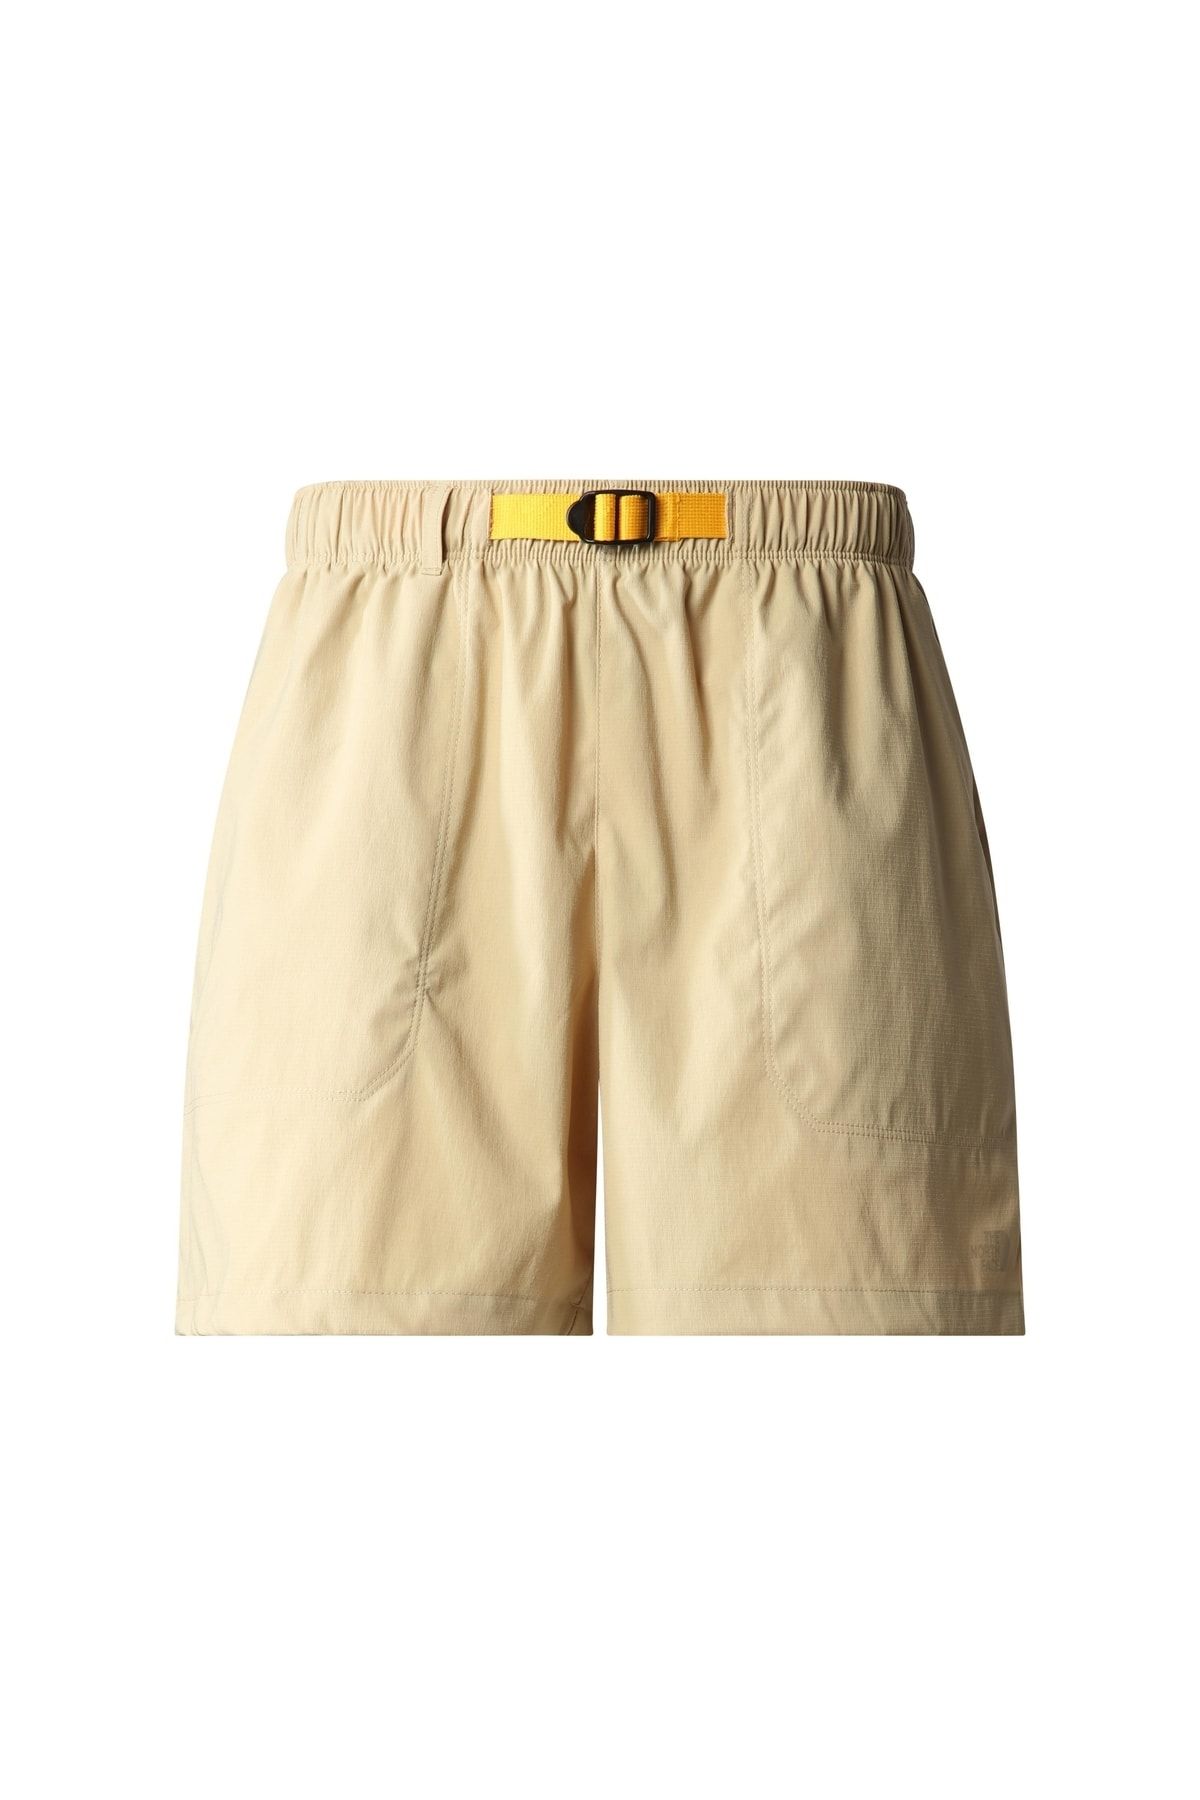 The North Face W Class V Pathfınder Belted Short Nf0a81vwlk51